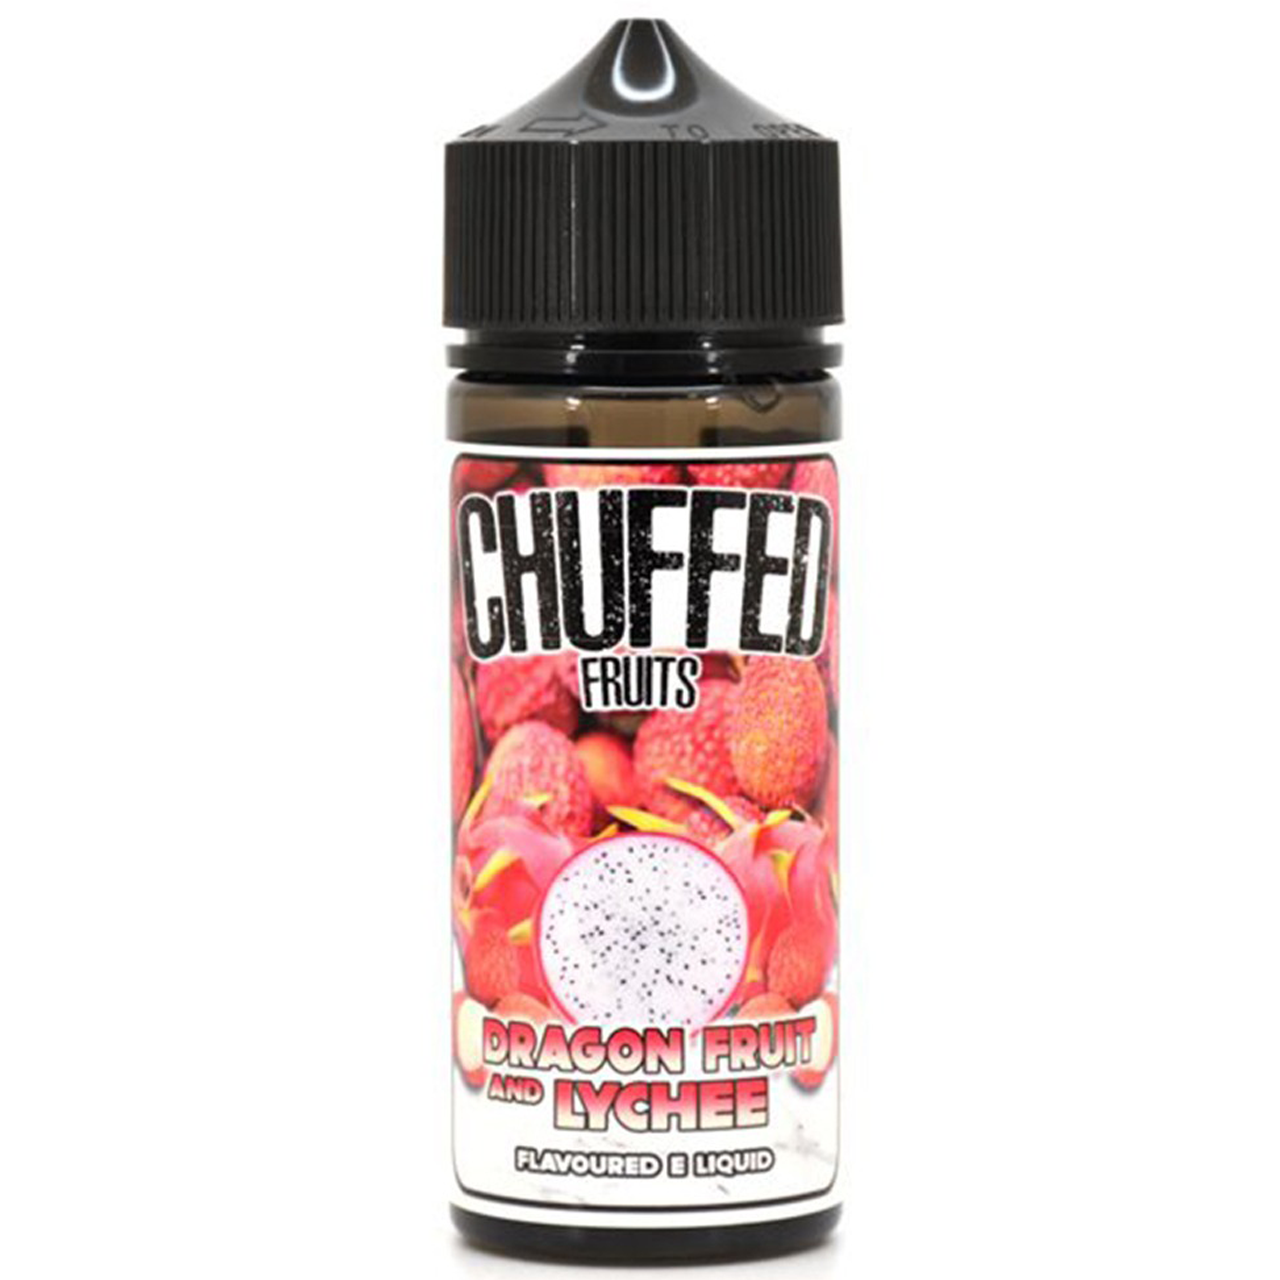 Dragonfruit and Lychee by Chuffed 120ML